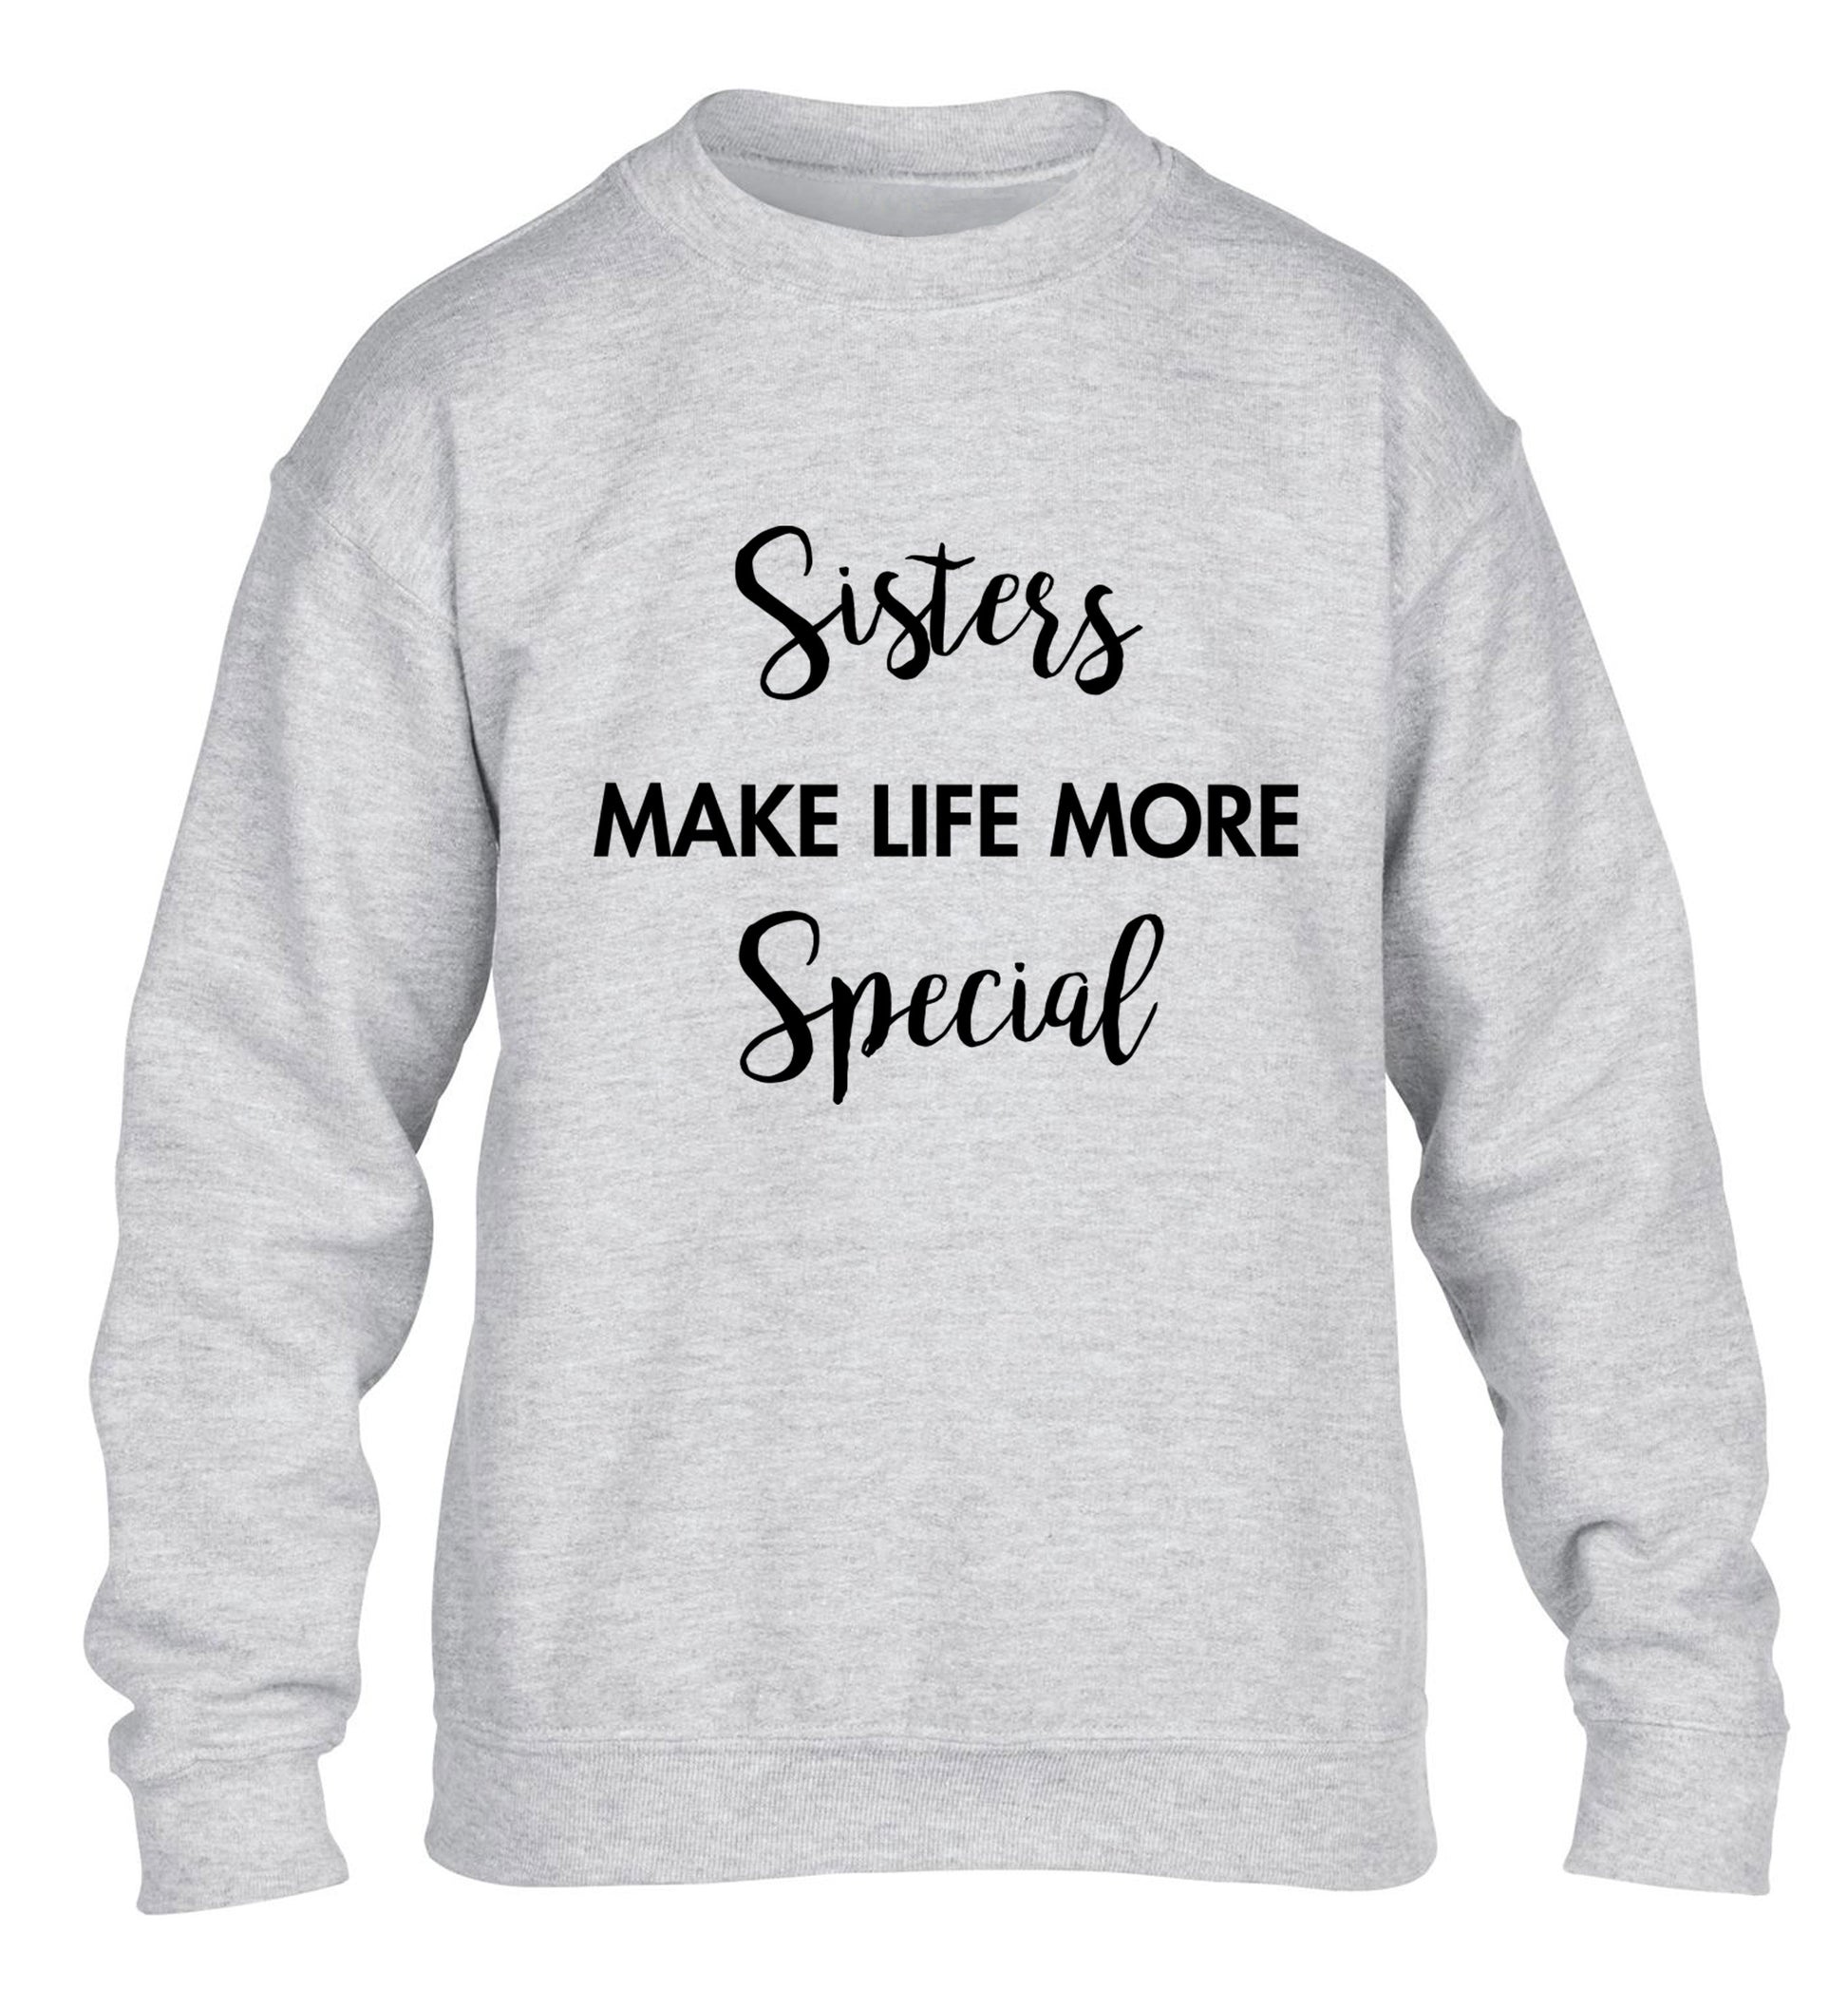 Sisters make life more special children's grey sweater 12-14 Years